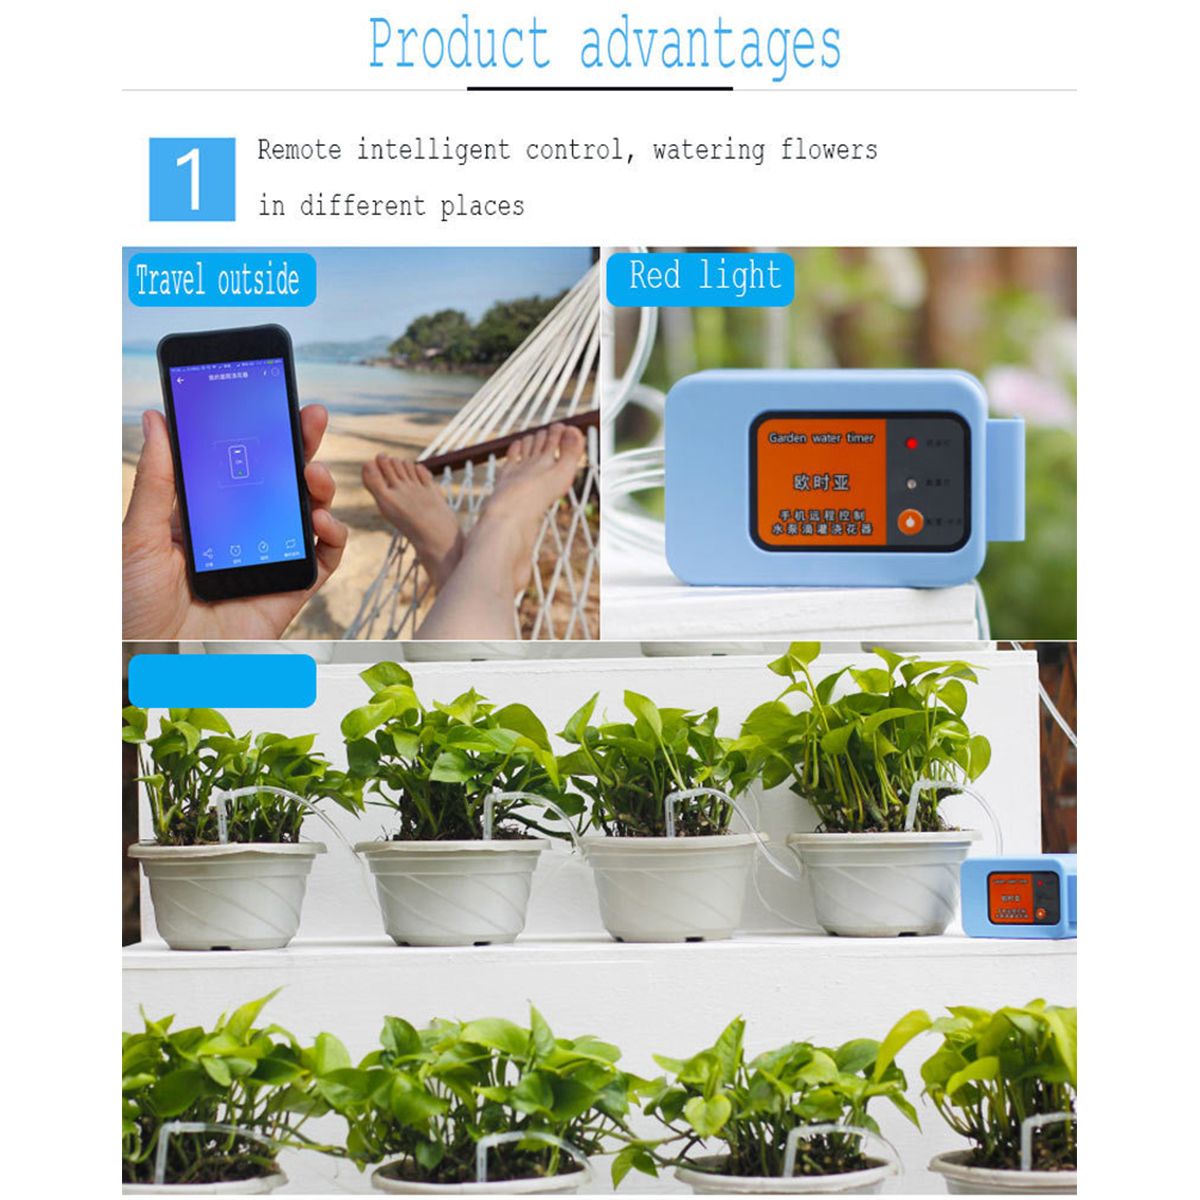 Automatic-Watering-Device-Phone-Control-Irrigation-System-Irrigation-Computer-Irrigation-Timer-with--1580072